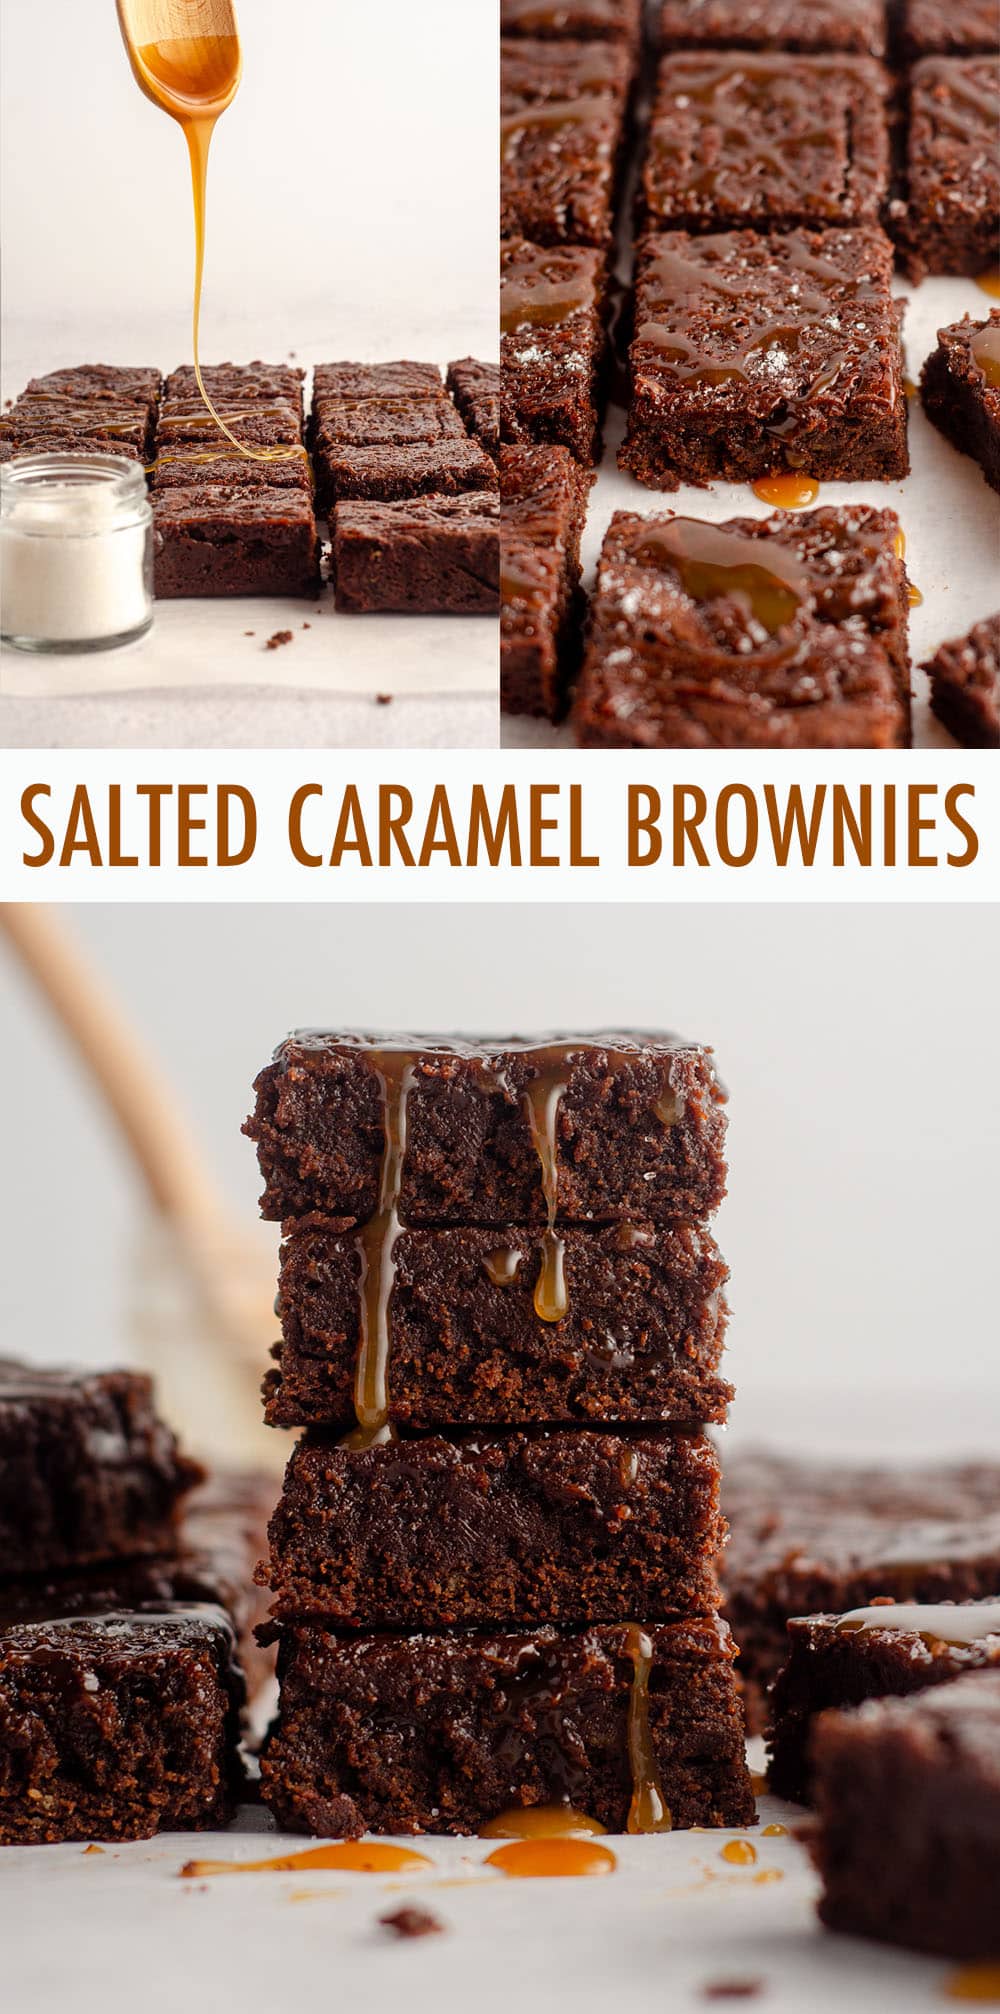 Fudgy brownies made from scratch with salted caramel sauce swirled right into the brownie batter. Drizzle with more salted caramel sauce and sprinkle with flaky sea salt for a perfectly sweet and salty treat. via @frshaprilflours